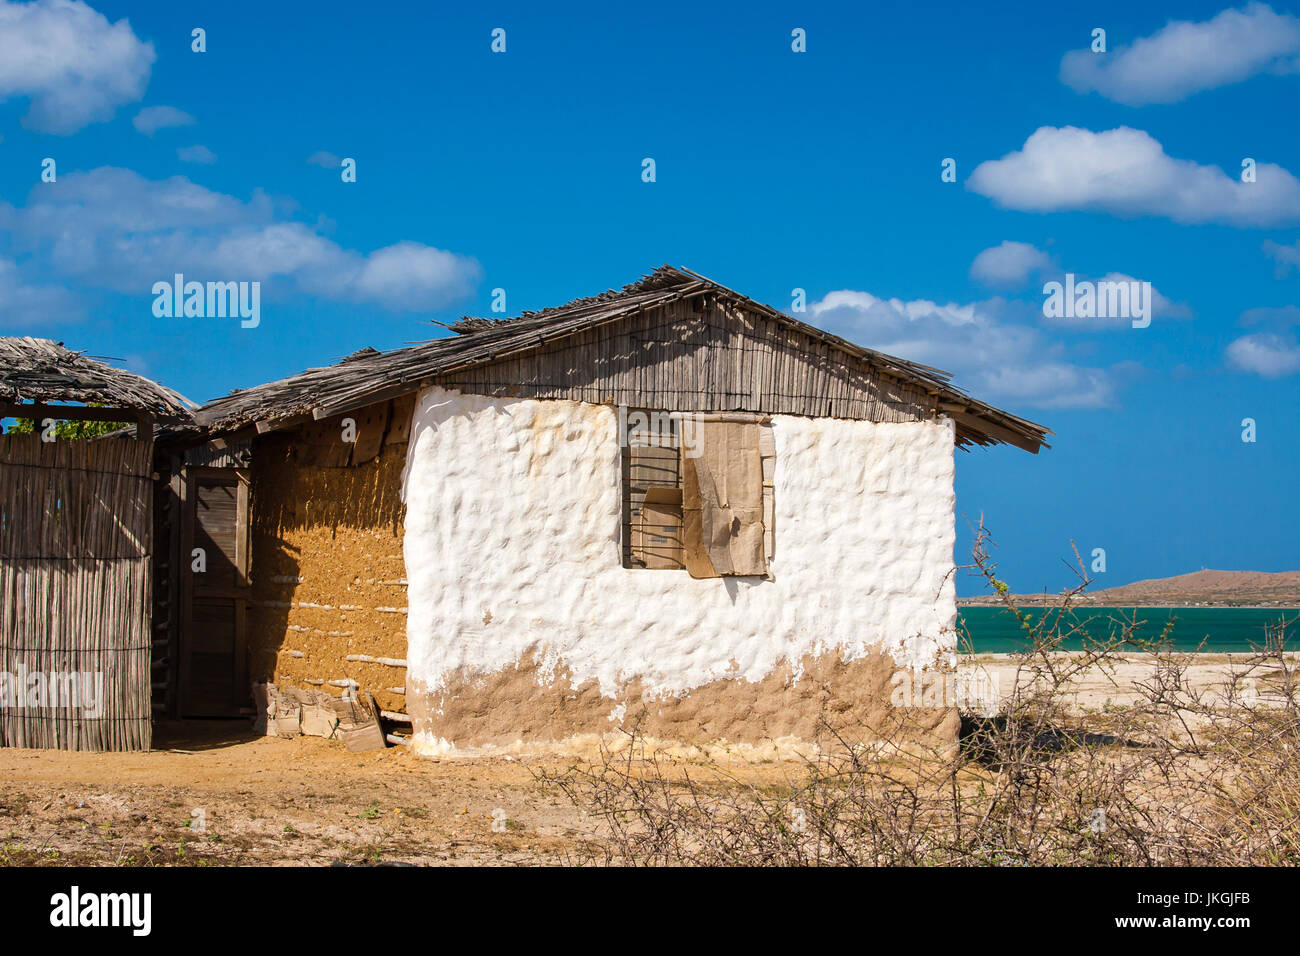 Traditional adobe house next to the sea under blue sky Stock Photo